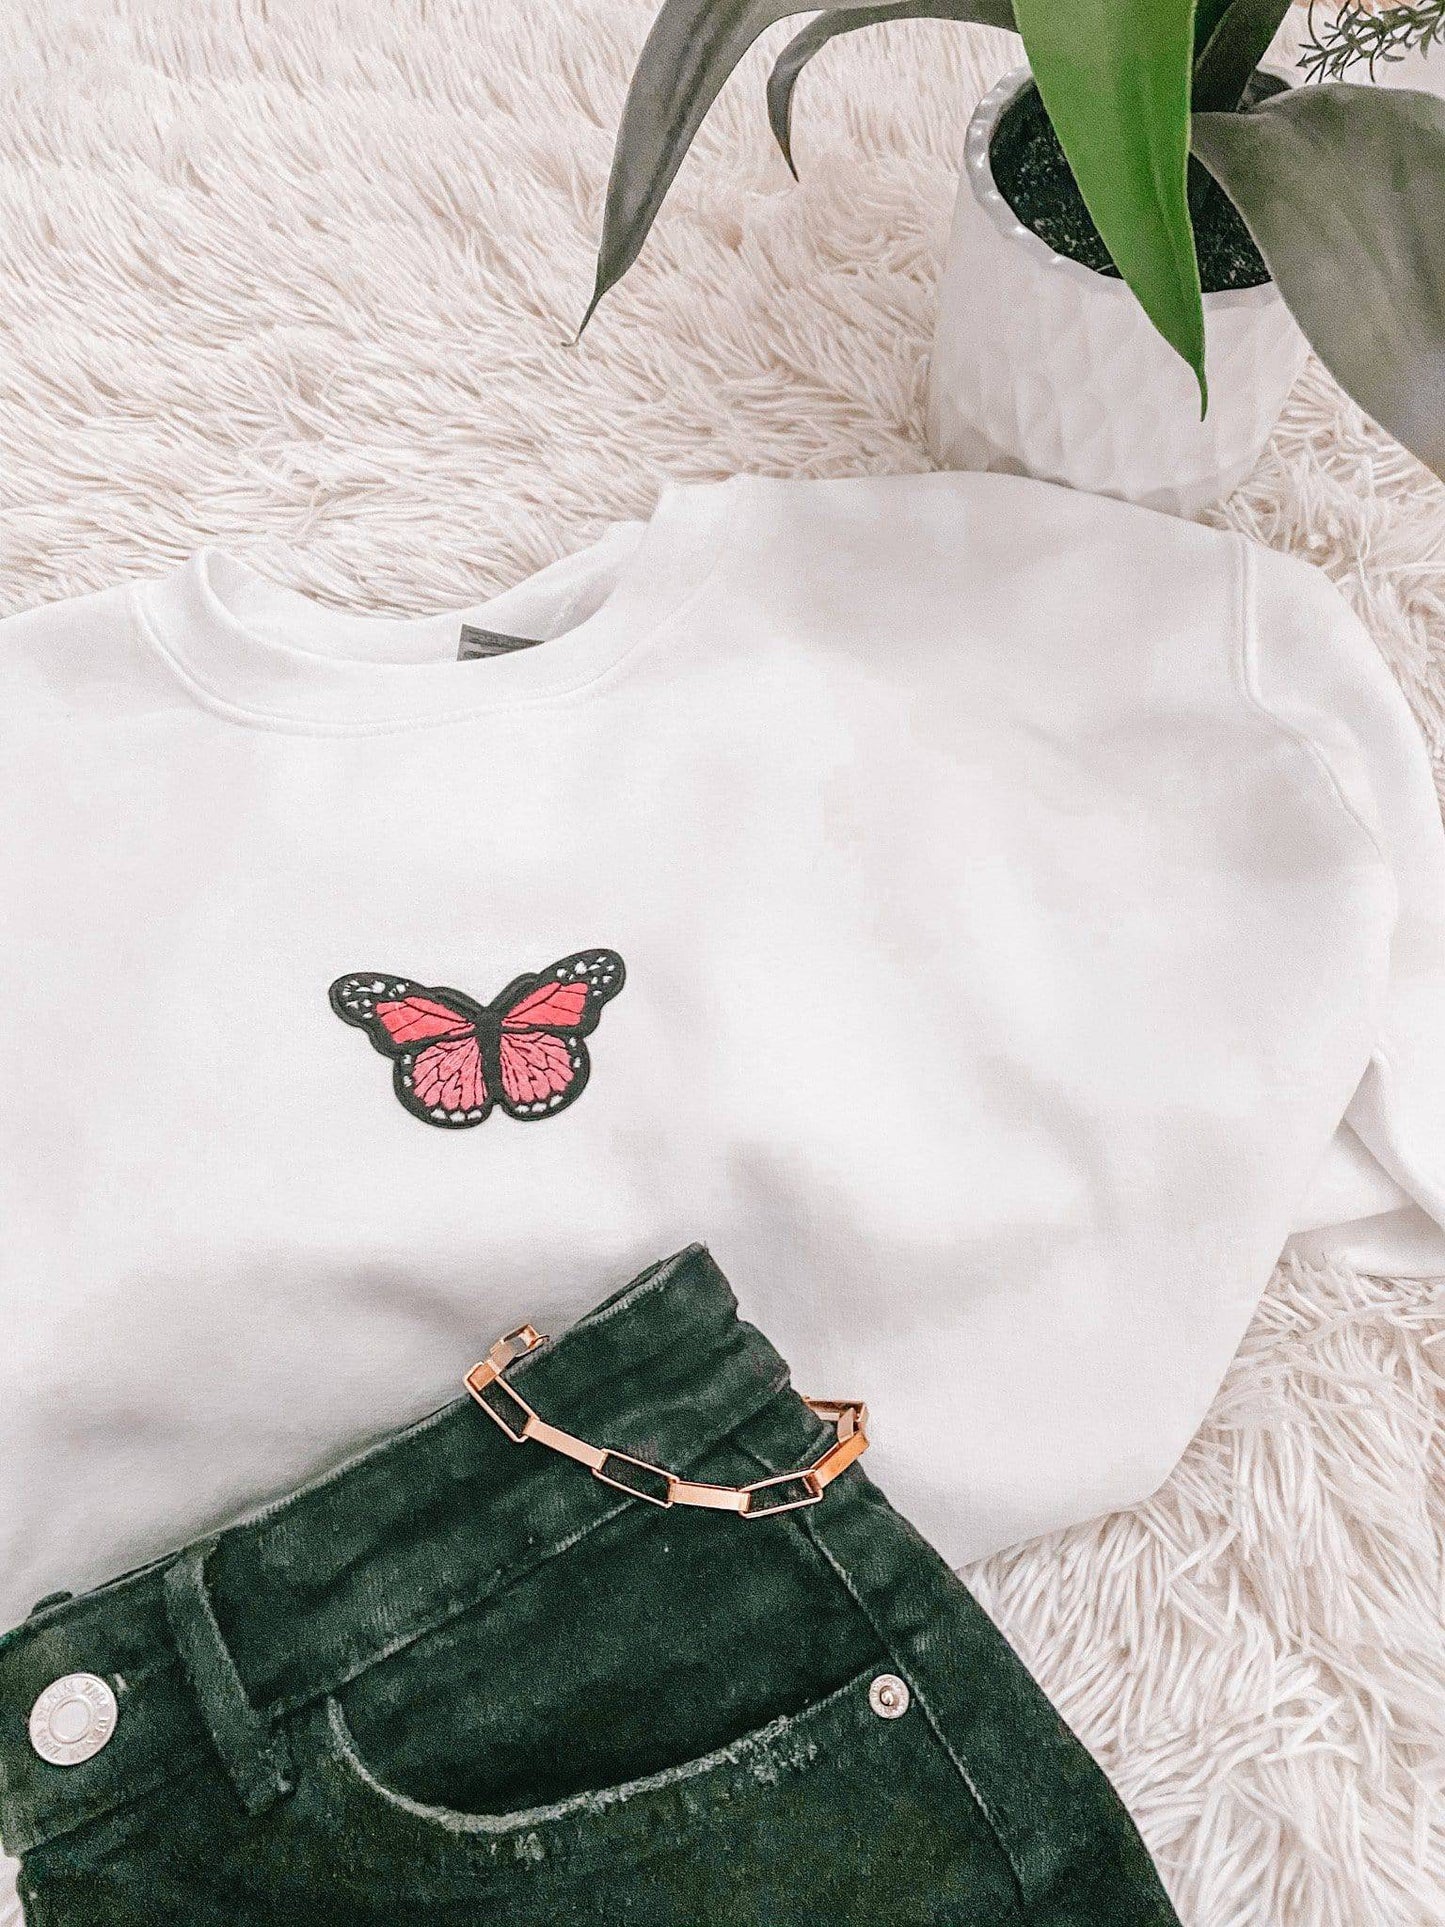 Butterfly Embroidered Patch Crewneck - JEWELS KENNEDY DESIGNS